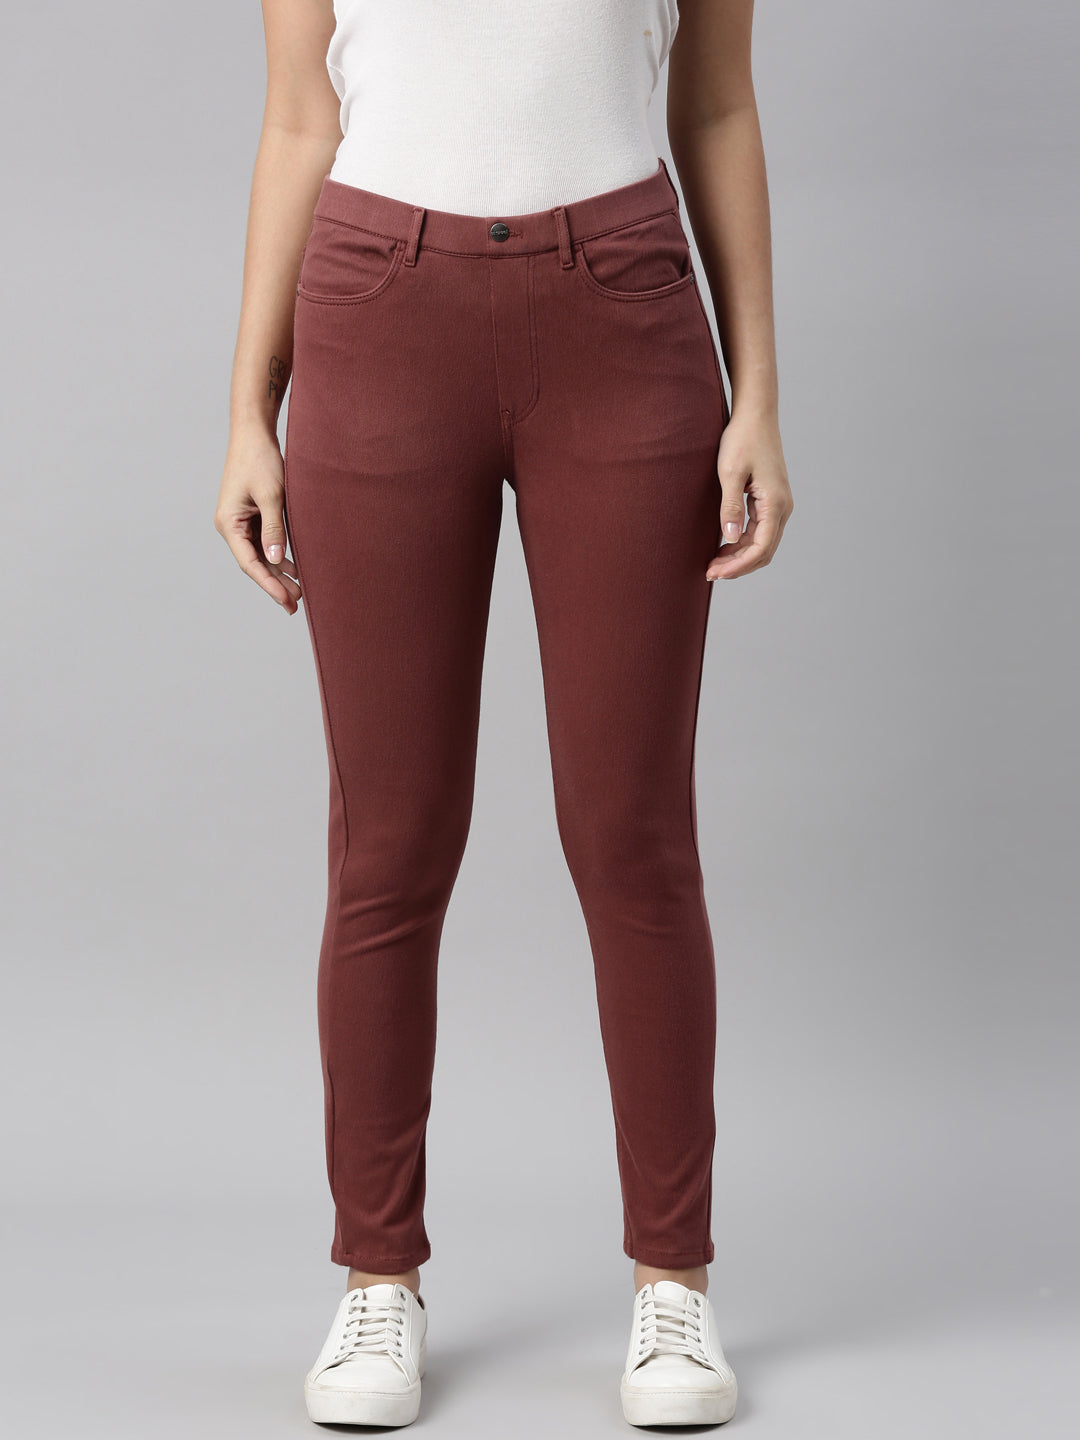 Black Solid Ankle-Length Casual Women Slim Fit Jeggings - Selling